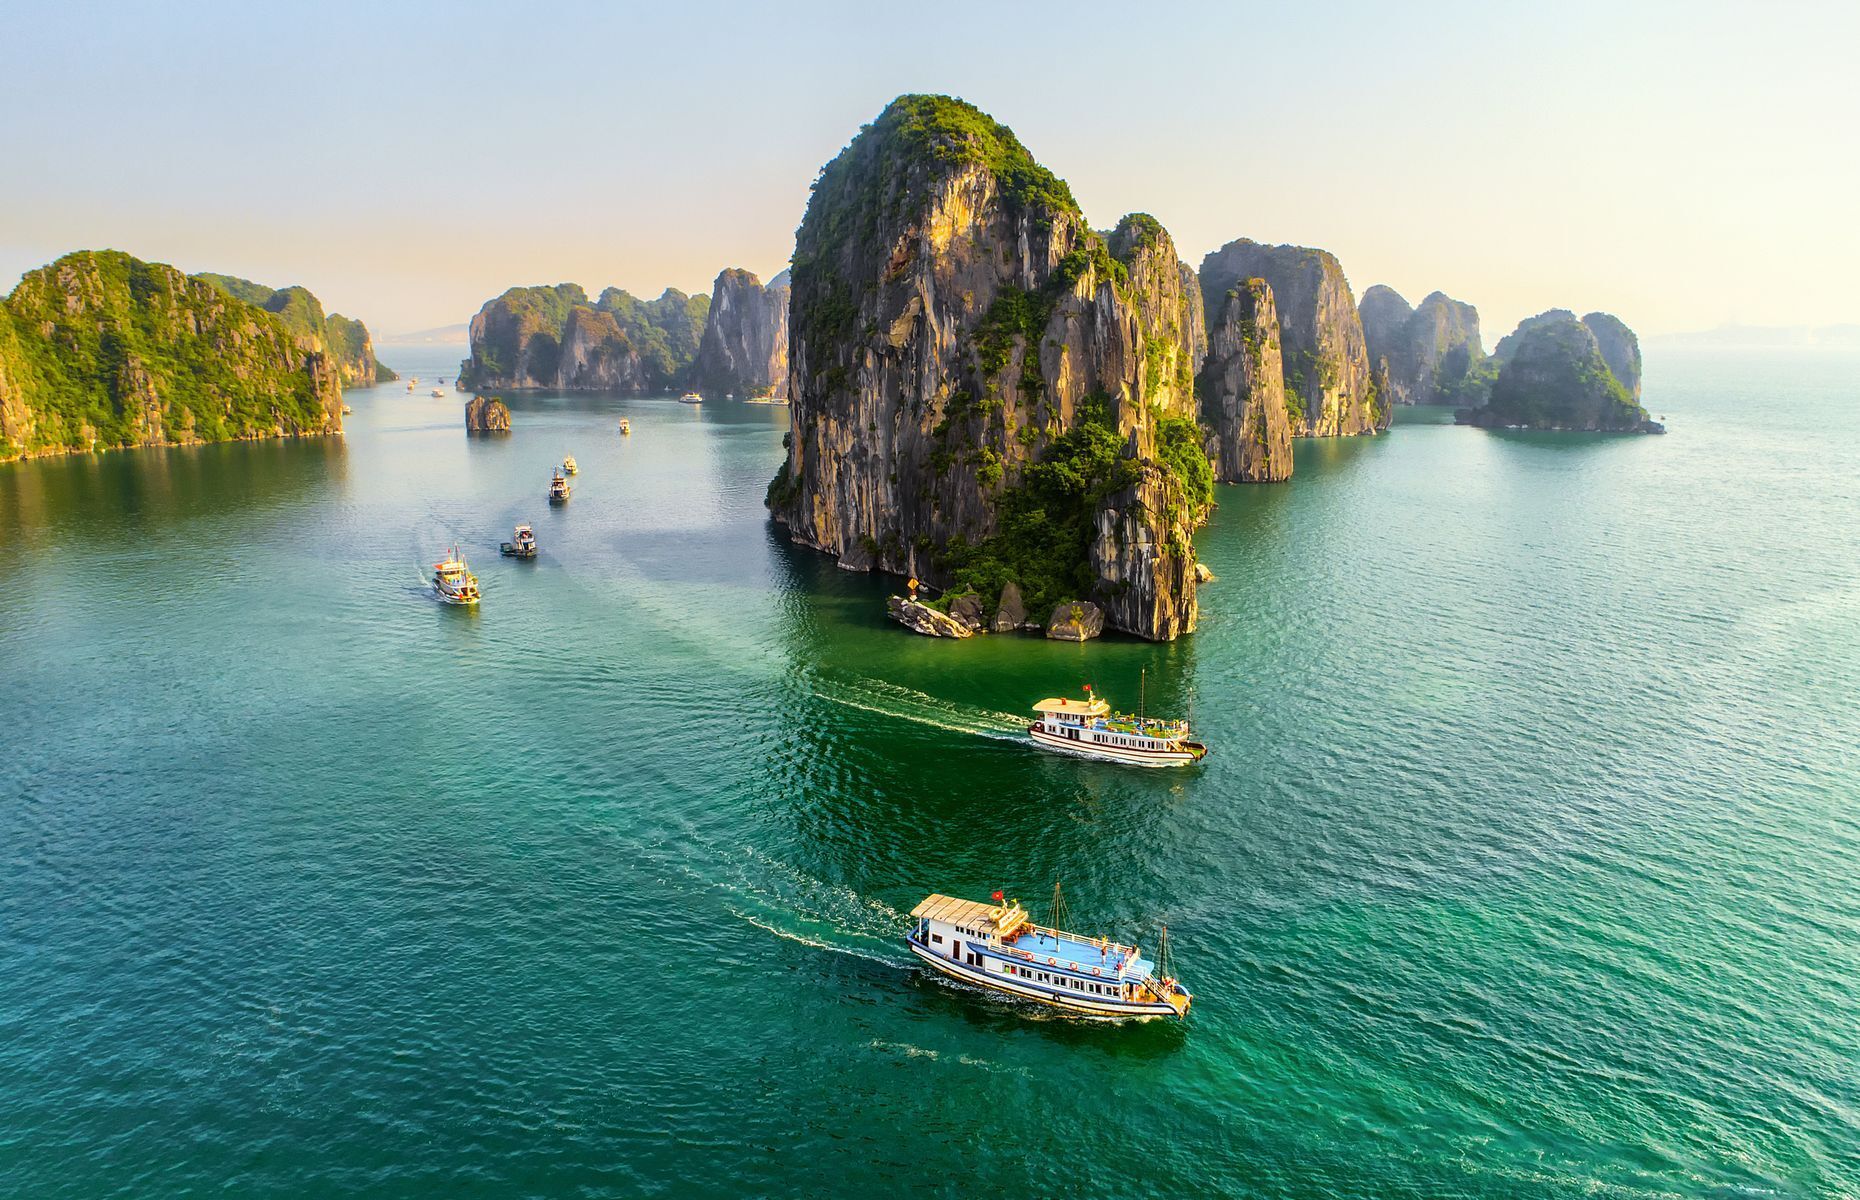 <p>Certainly one of Southeast Asia’s most emblematic locales, <a href="https://www.lonelyplanet.com/vietnam/northeast-vietnam/halong-bay" class="atom_link atom_valid" rel="noreferrer noopener">Ha Long Bay</a> is not only a north Vietnamese natural treasure, but also a <a href="https://whc.unesco.org/en/list/672/" class="atom_link atom_valid" rel="noreferrer noopener">UNESCO</a> World Heritage Site. Thousands of karst islands, covered in lush vegetation, emerge from emerald waters to create a most impressive landscape. Take a trip on a traditional boat to explore its caves and hidden lagoons or opt for kayaking and paddle among its picturesque rock formations. For optimum temperatures outside of the rainy season, schedule your trip between October and April.</p>